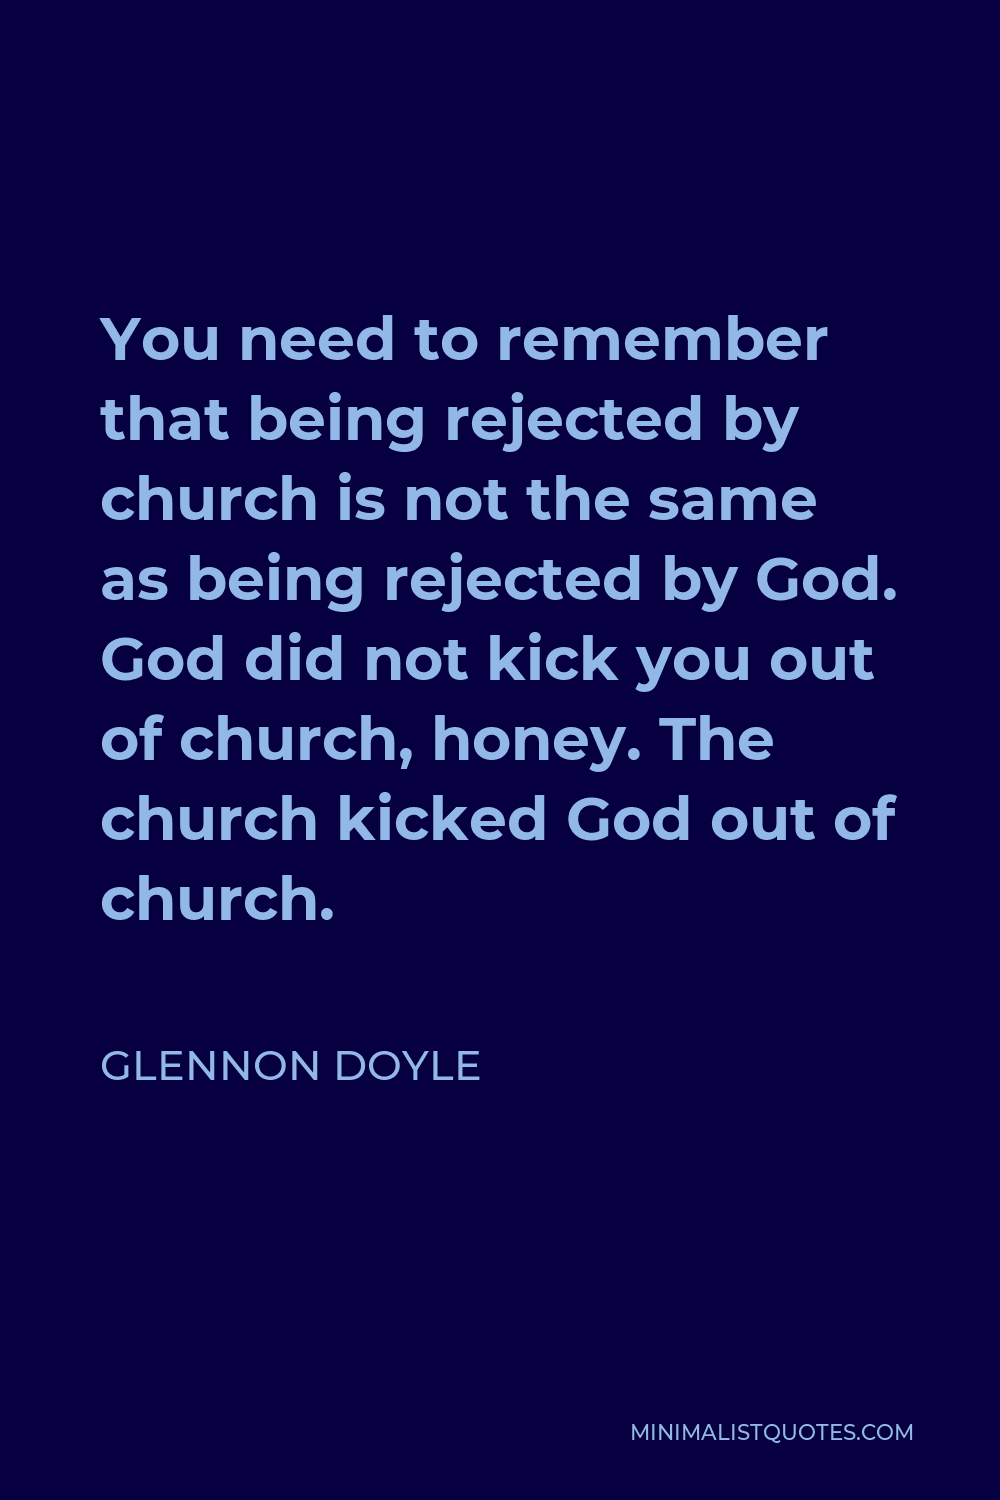 Glennon Doyle Quote - You need to remember that being rejected by church is not the same as being rejected by God. God did not kick you out of church, honey. The church kicked God out of church.